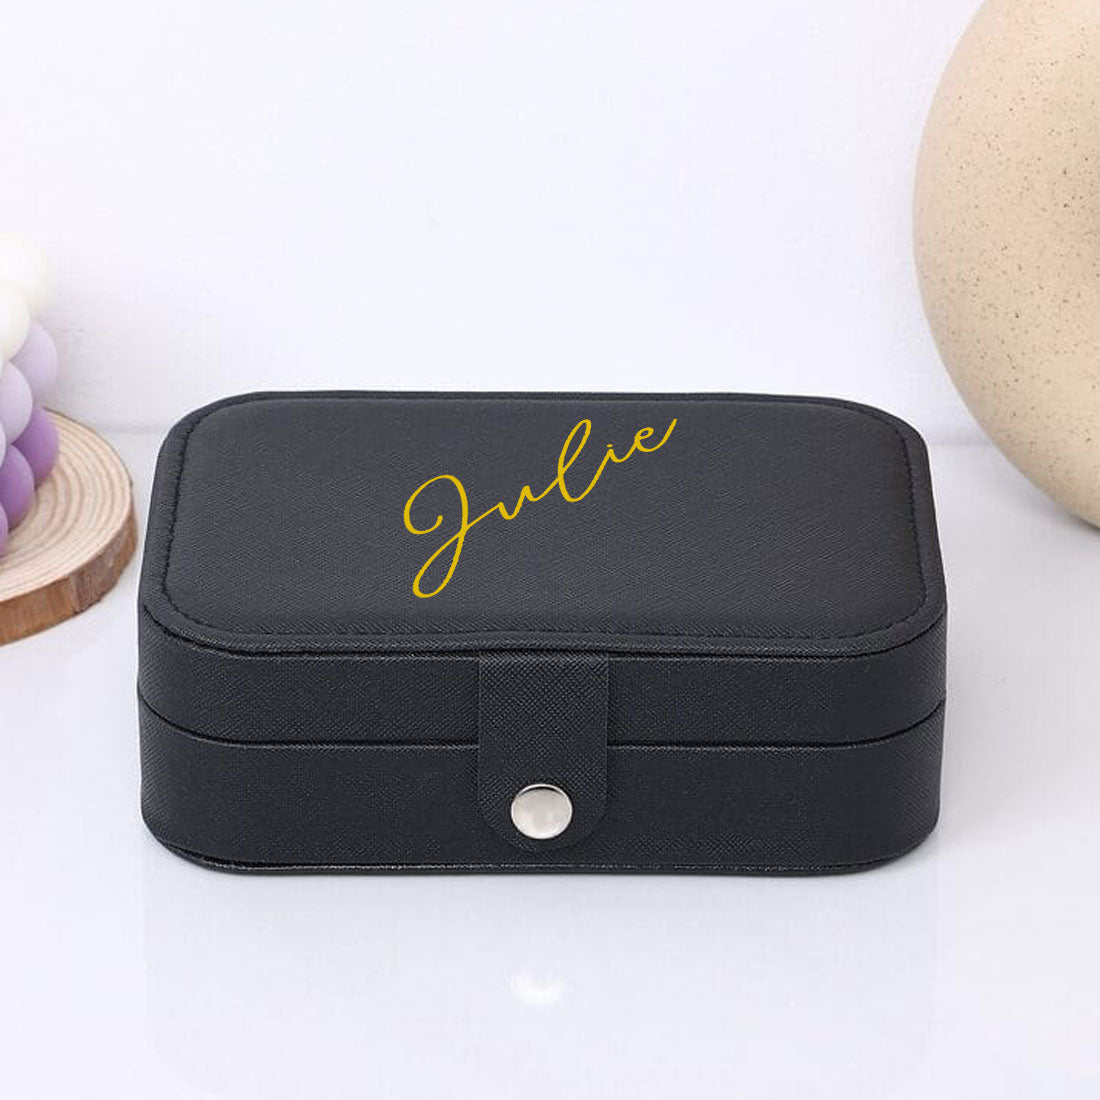 Jewellery Box Customized for Travel Storage Case for Rings Earrings and Pendants